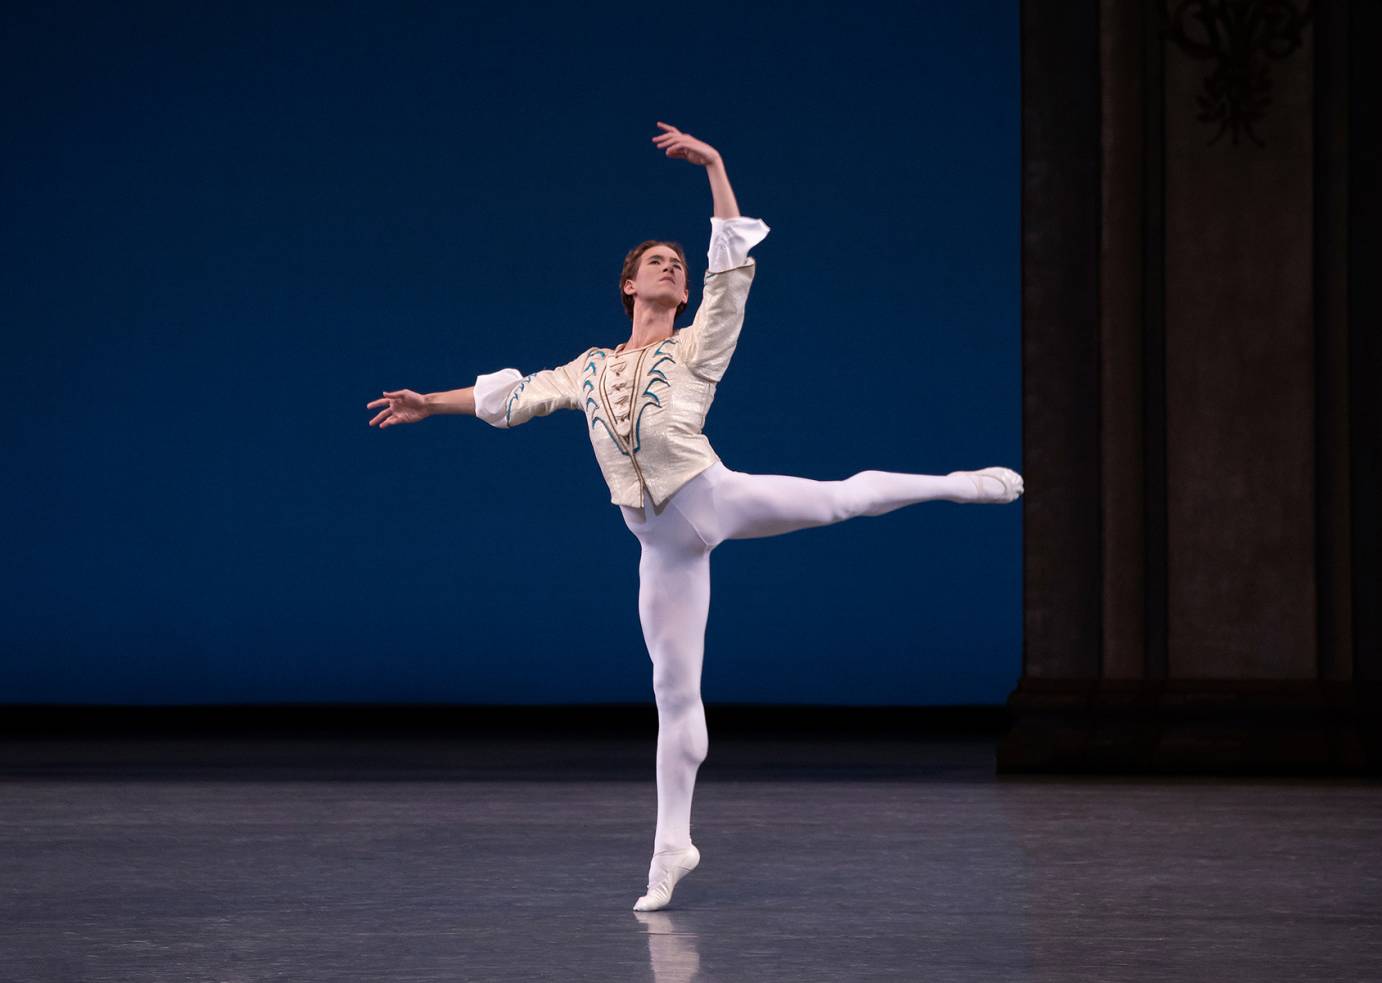 Joseph Gordon balances in an arabesque, one arm rounded overhead, the other extended to the side